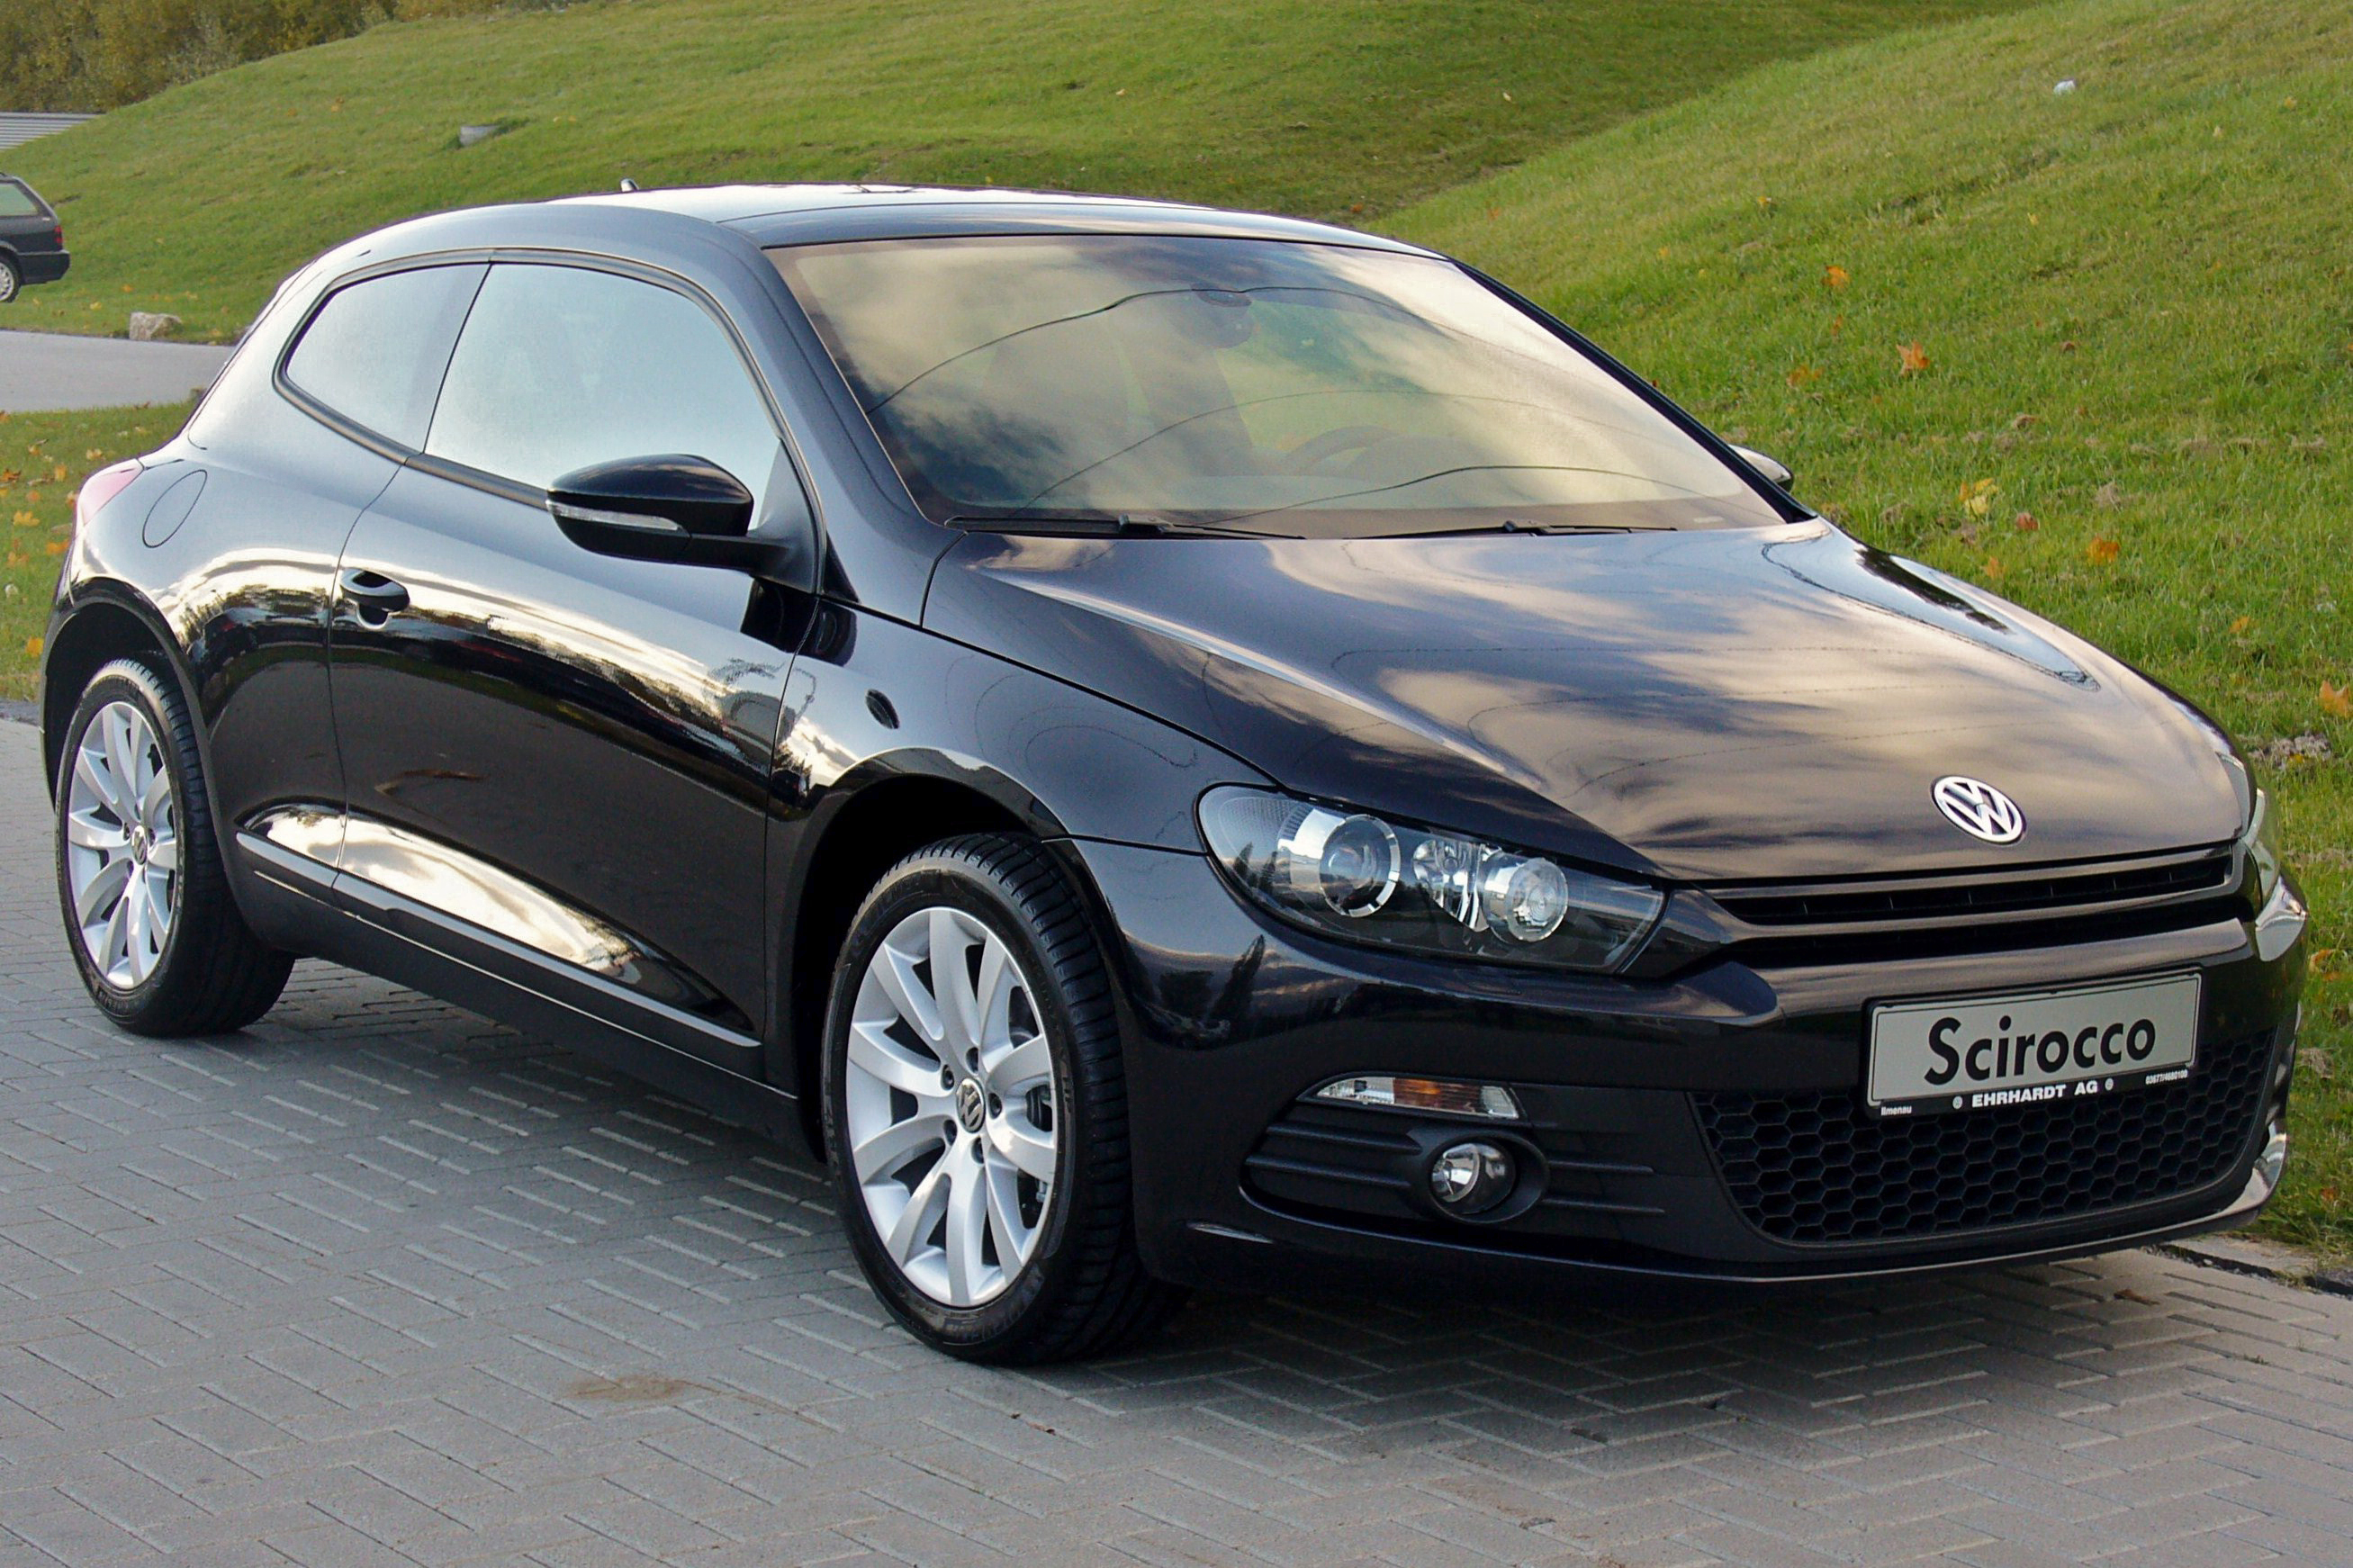 VW Scirocco 1.4 TSI technical details, history, photos on